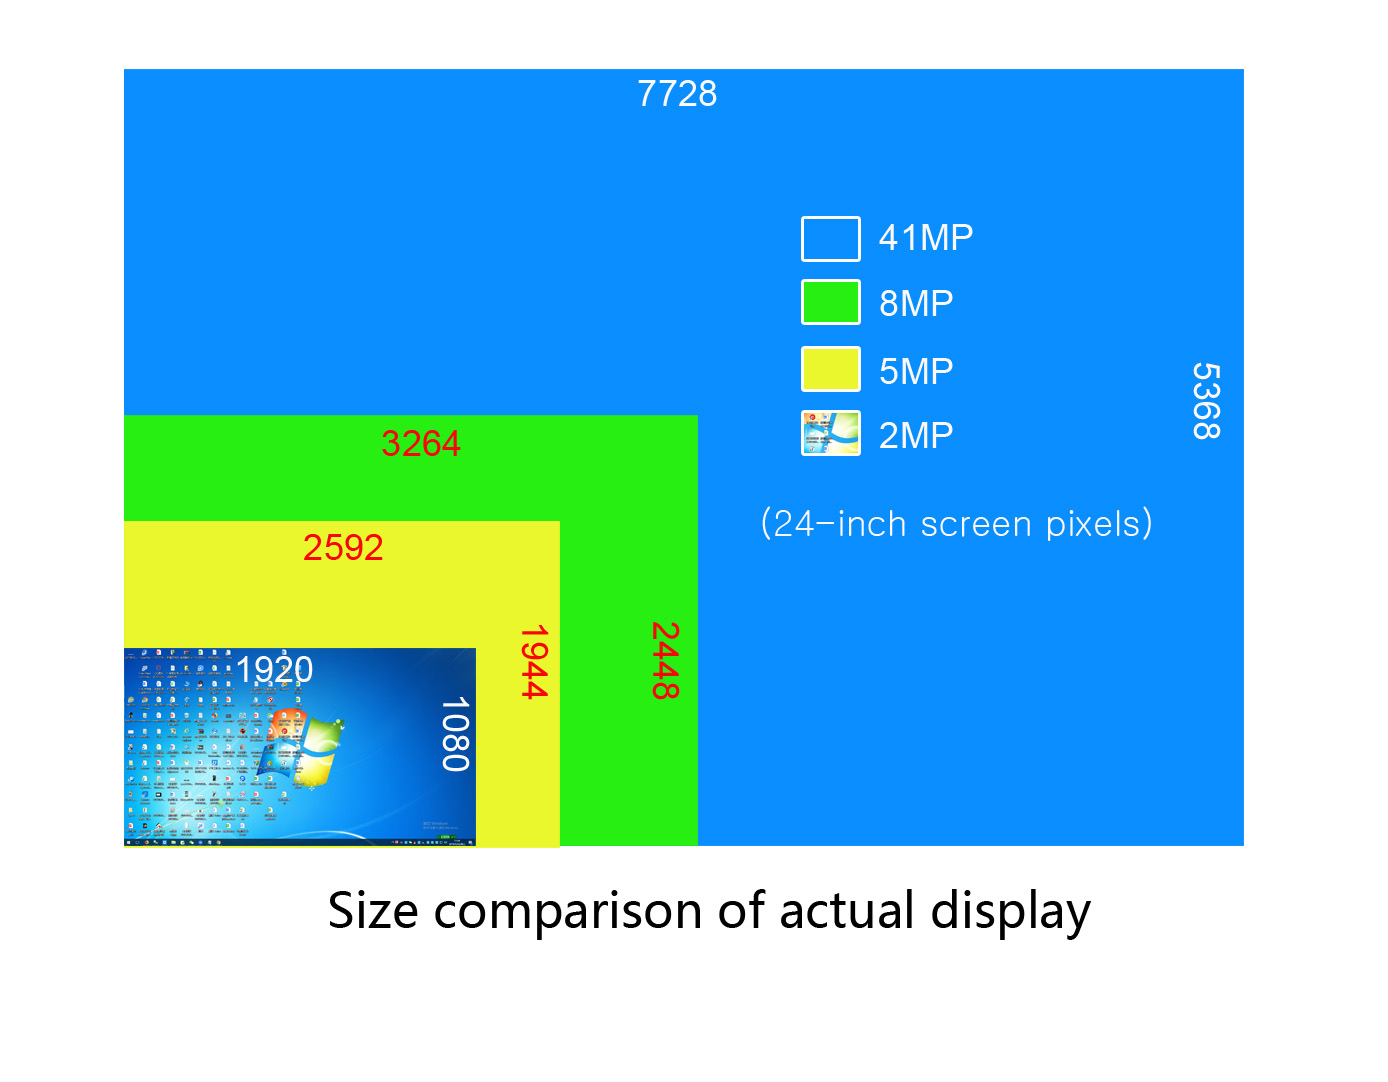 Actual display size for each pixel range